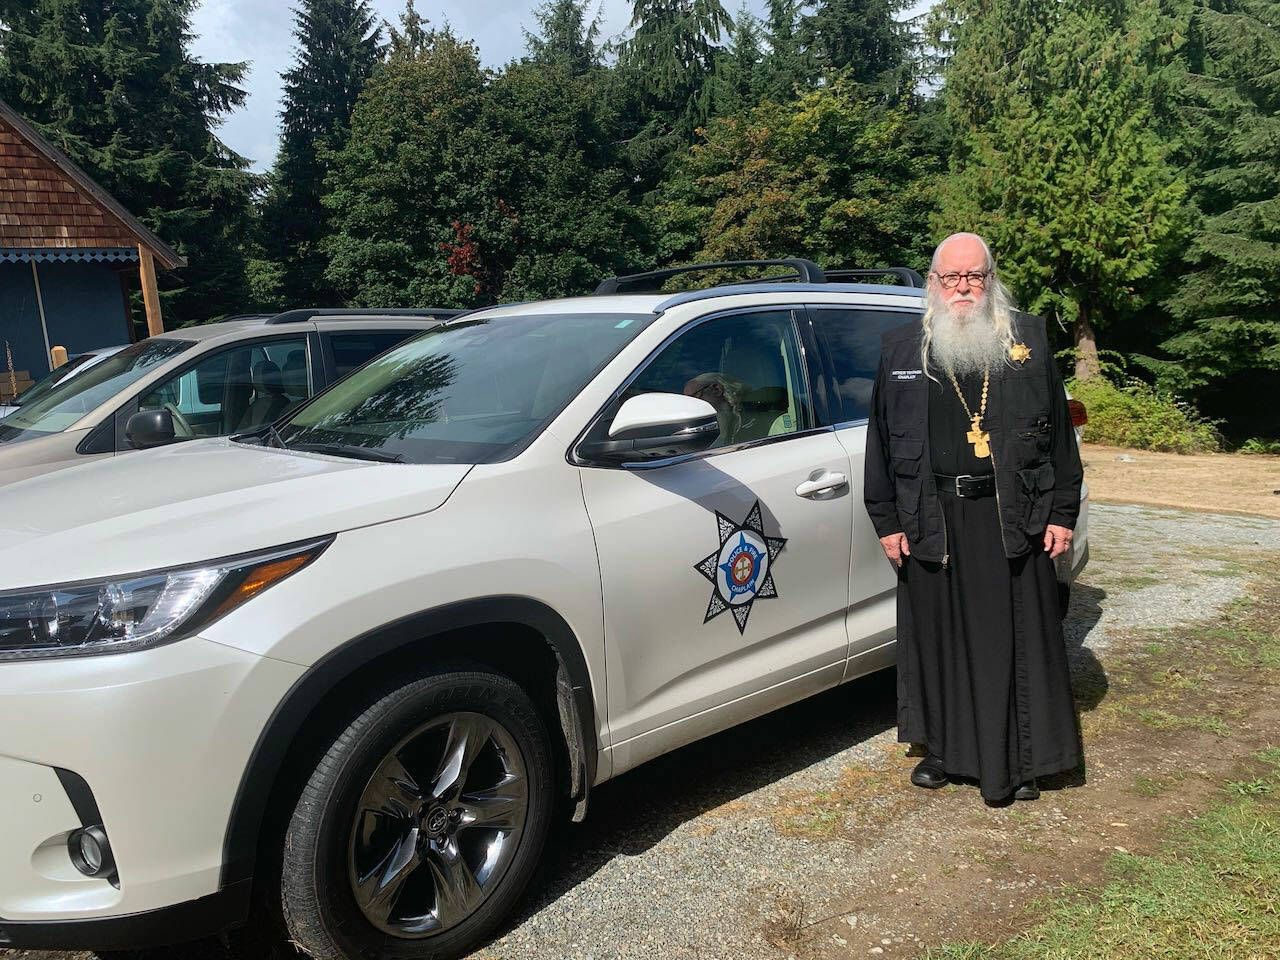 Courtesy Photo
Abbot Tryphon, of Vashon’s All-Merciful Savior Monastery, has long served as an unpaid fire and police chaplain on the island. In this photo, he is shown on the monastery’s grounds, standing by the vehicle he now uses to respond to calls.